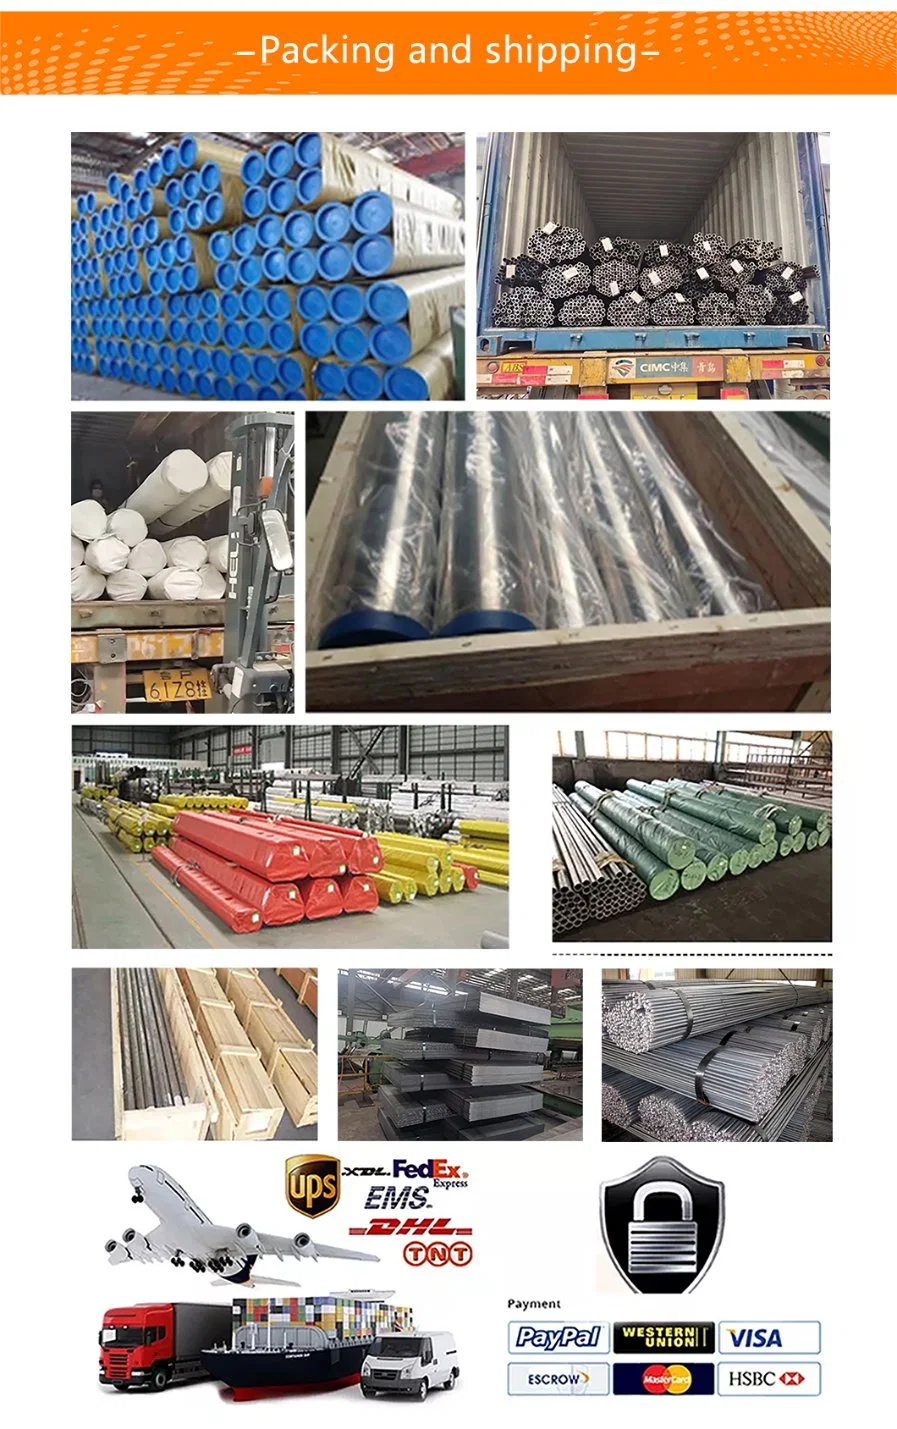 H-Shaped Steel/Carbon Steel/Carbon Steel Pipe/Alloy/Q235/Steel Pipe/Building Materials/Metal/Steel/Factory/Stainless Steel Pipe/Stainless Steel/Special Shaped